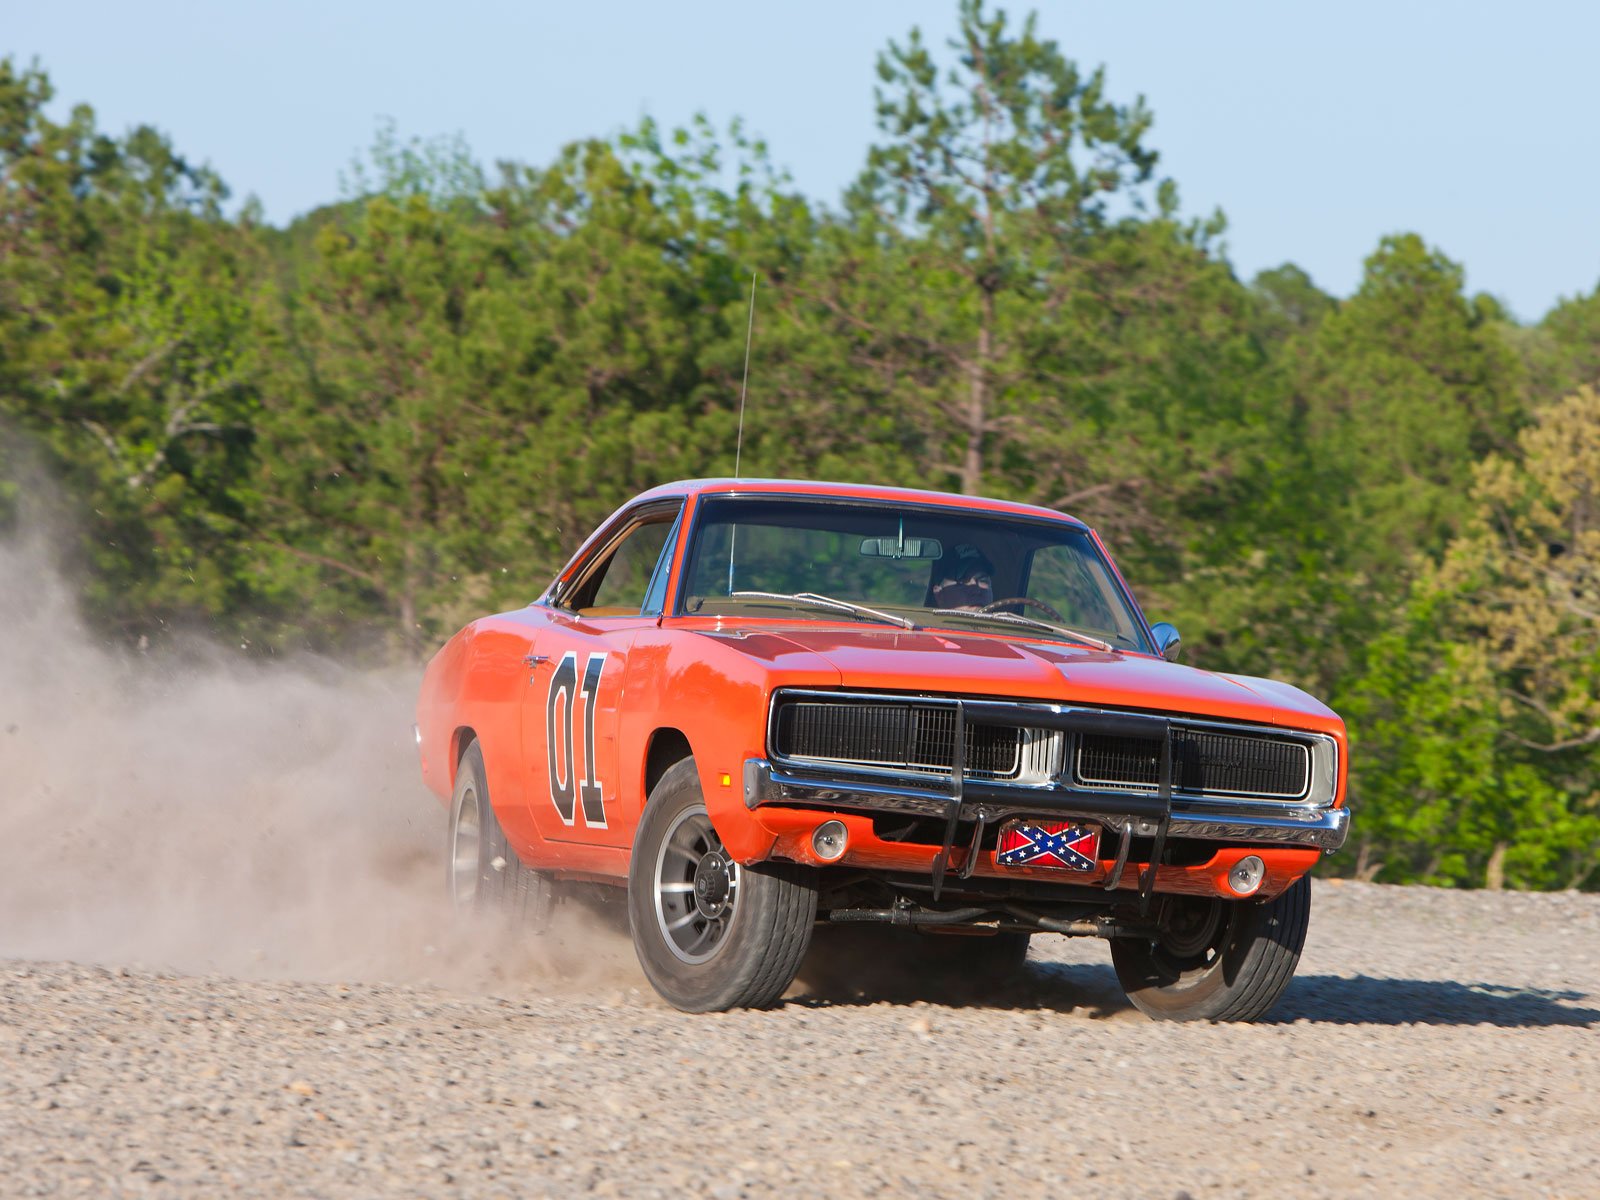 Wallpaper ID 550804  cut out muscle car gray background duke of  hazzard car gray no people land vehicle sports car general lee  colored background toy car mode of transportation free download